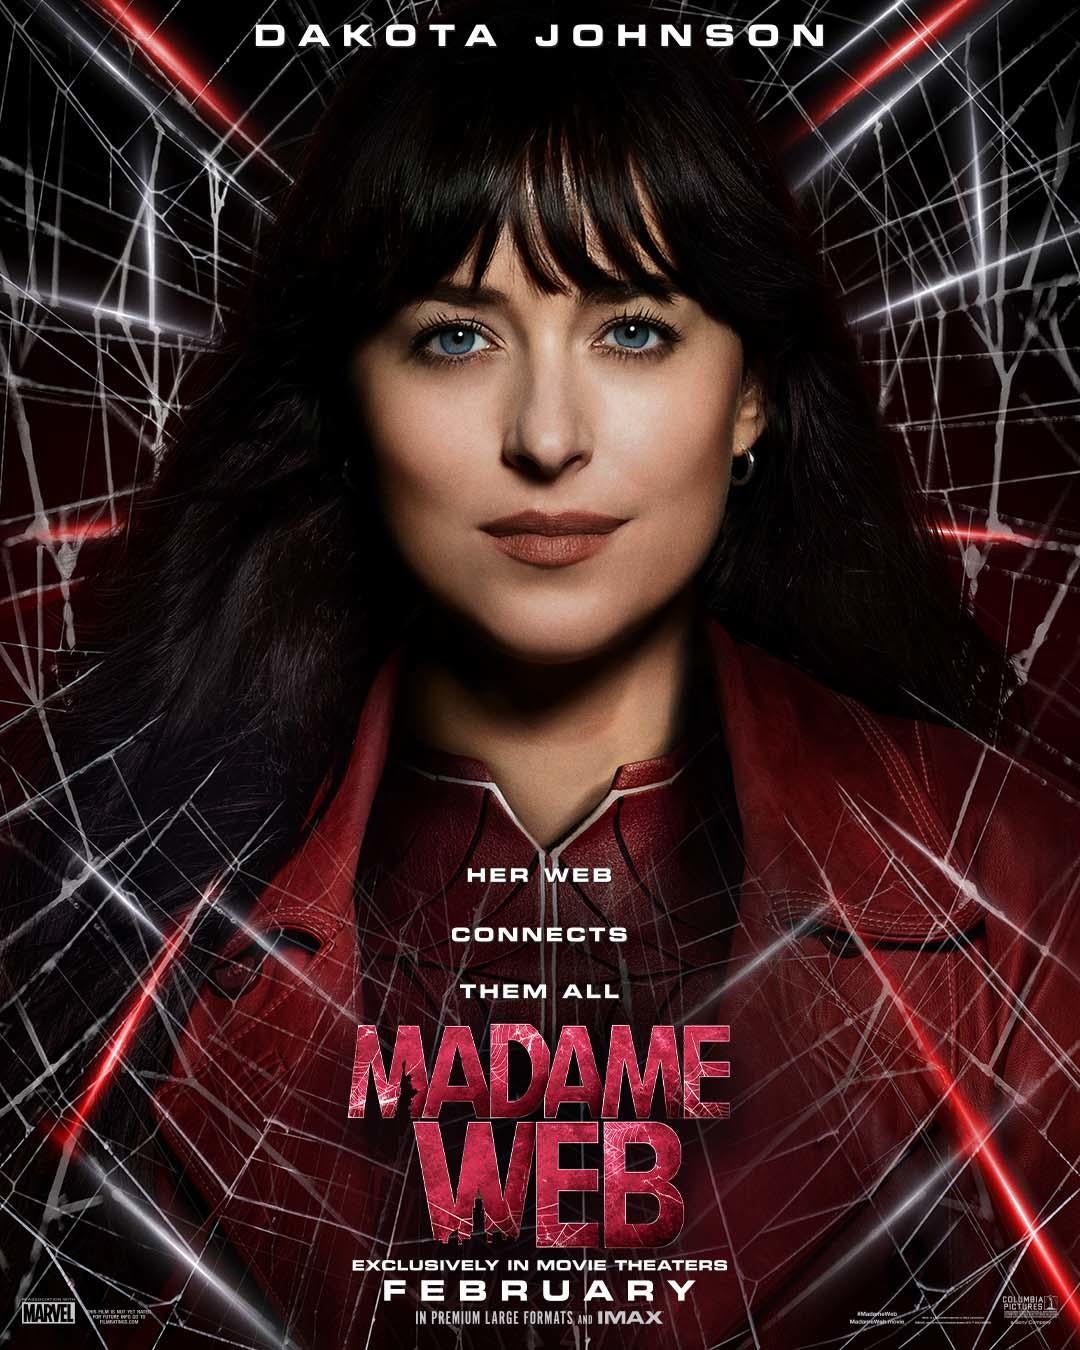 Madame Web Posters Highlight the SpiderMan Spinoff Cast